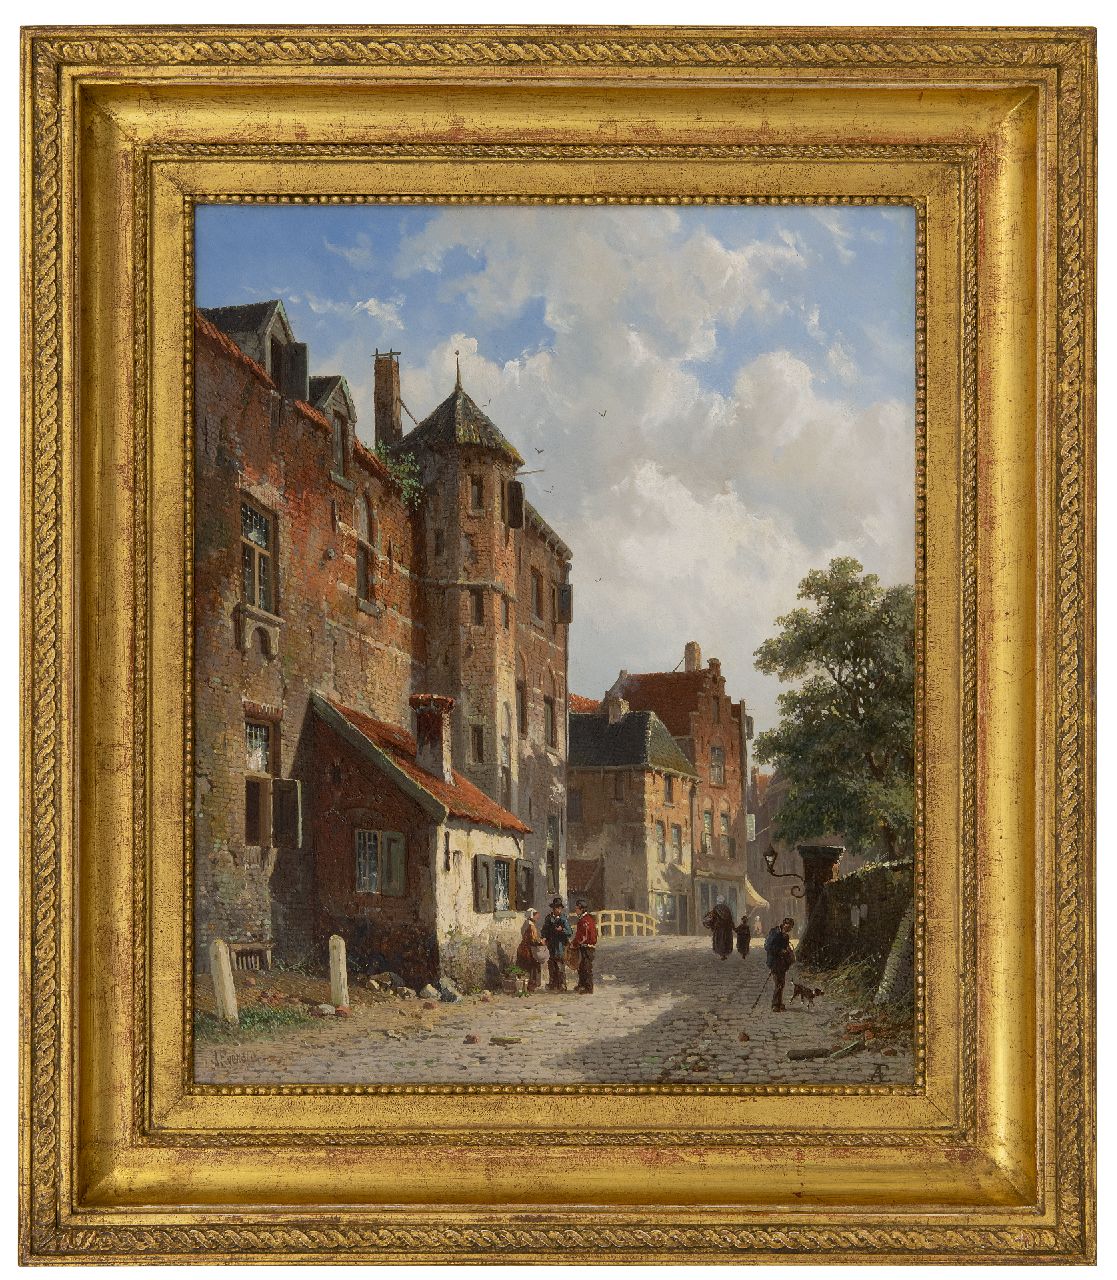 Eversen A.  | Adrianus Eversen | Paintings offered for sale | Sunny Dutch street, oil on panel 41.8 x 34.4 cm, signed l.l. in full and l.r. with monogram